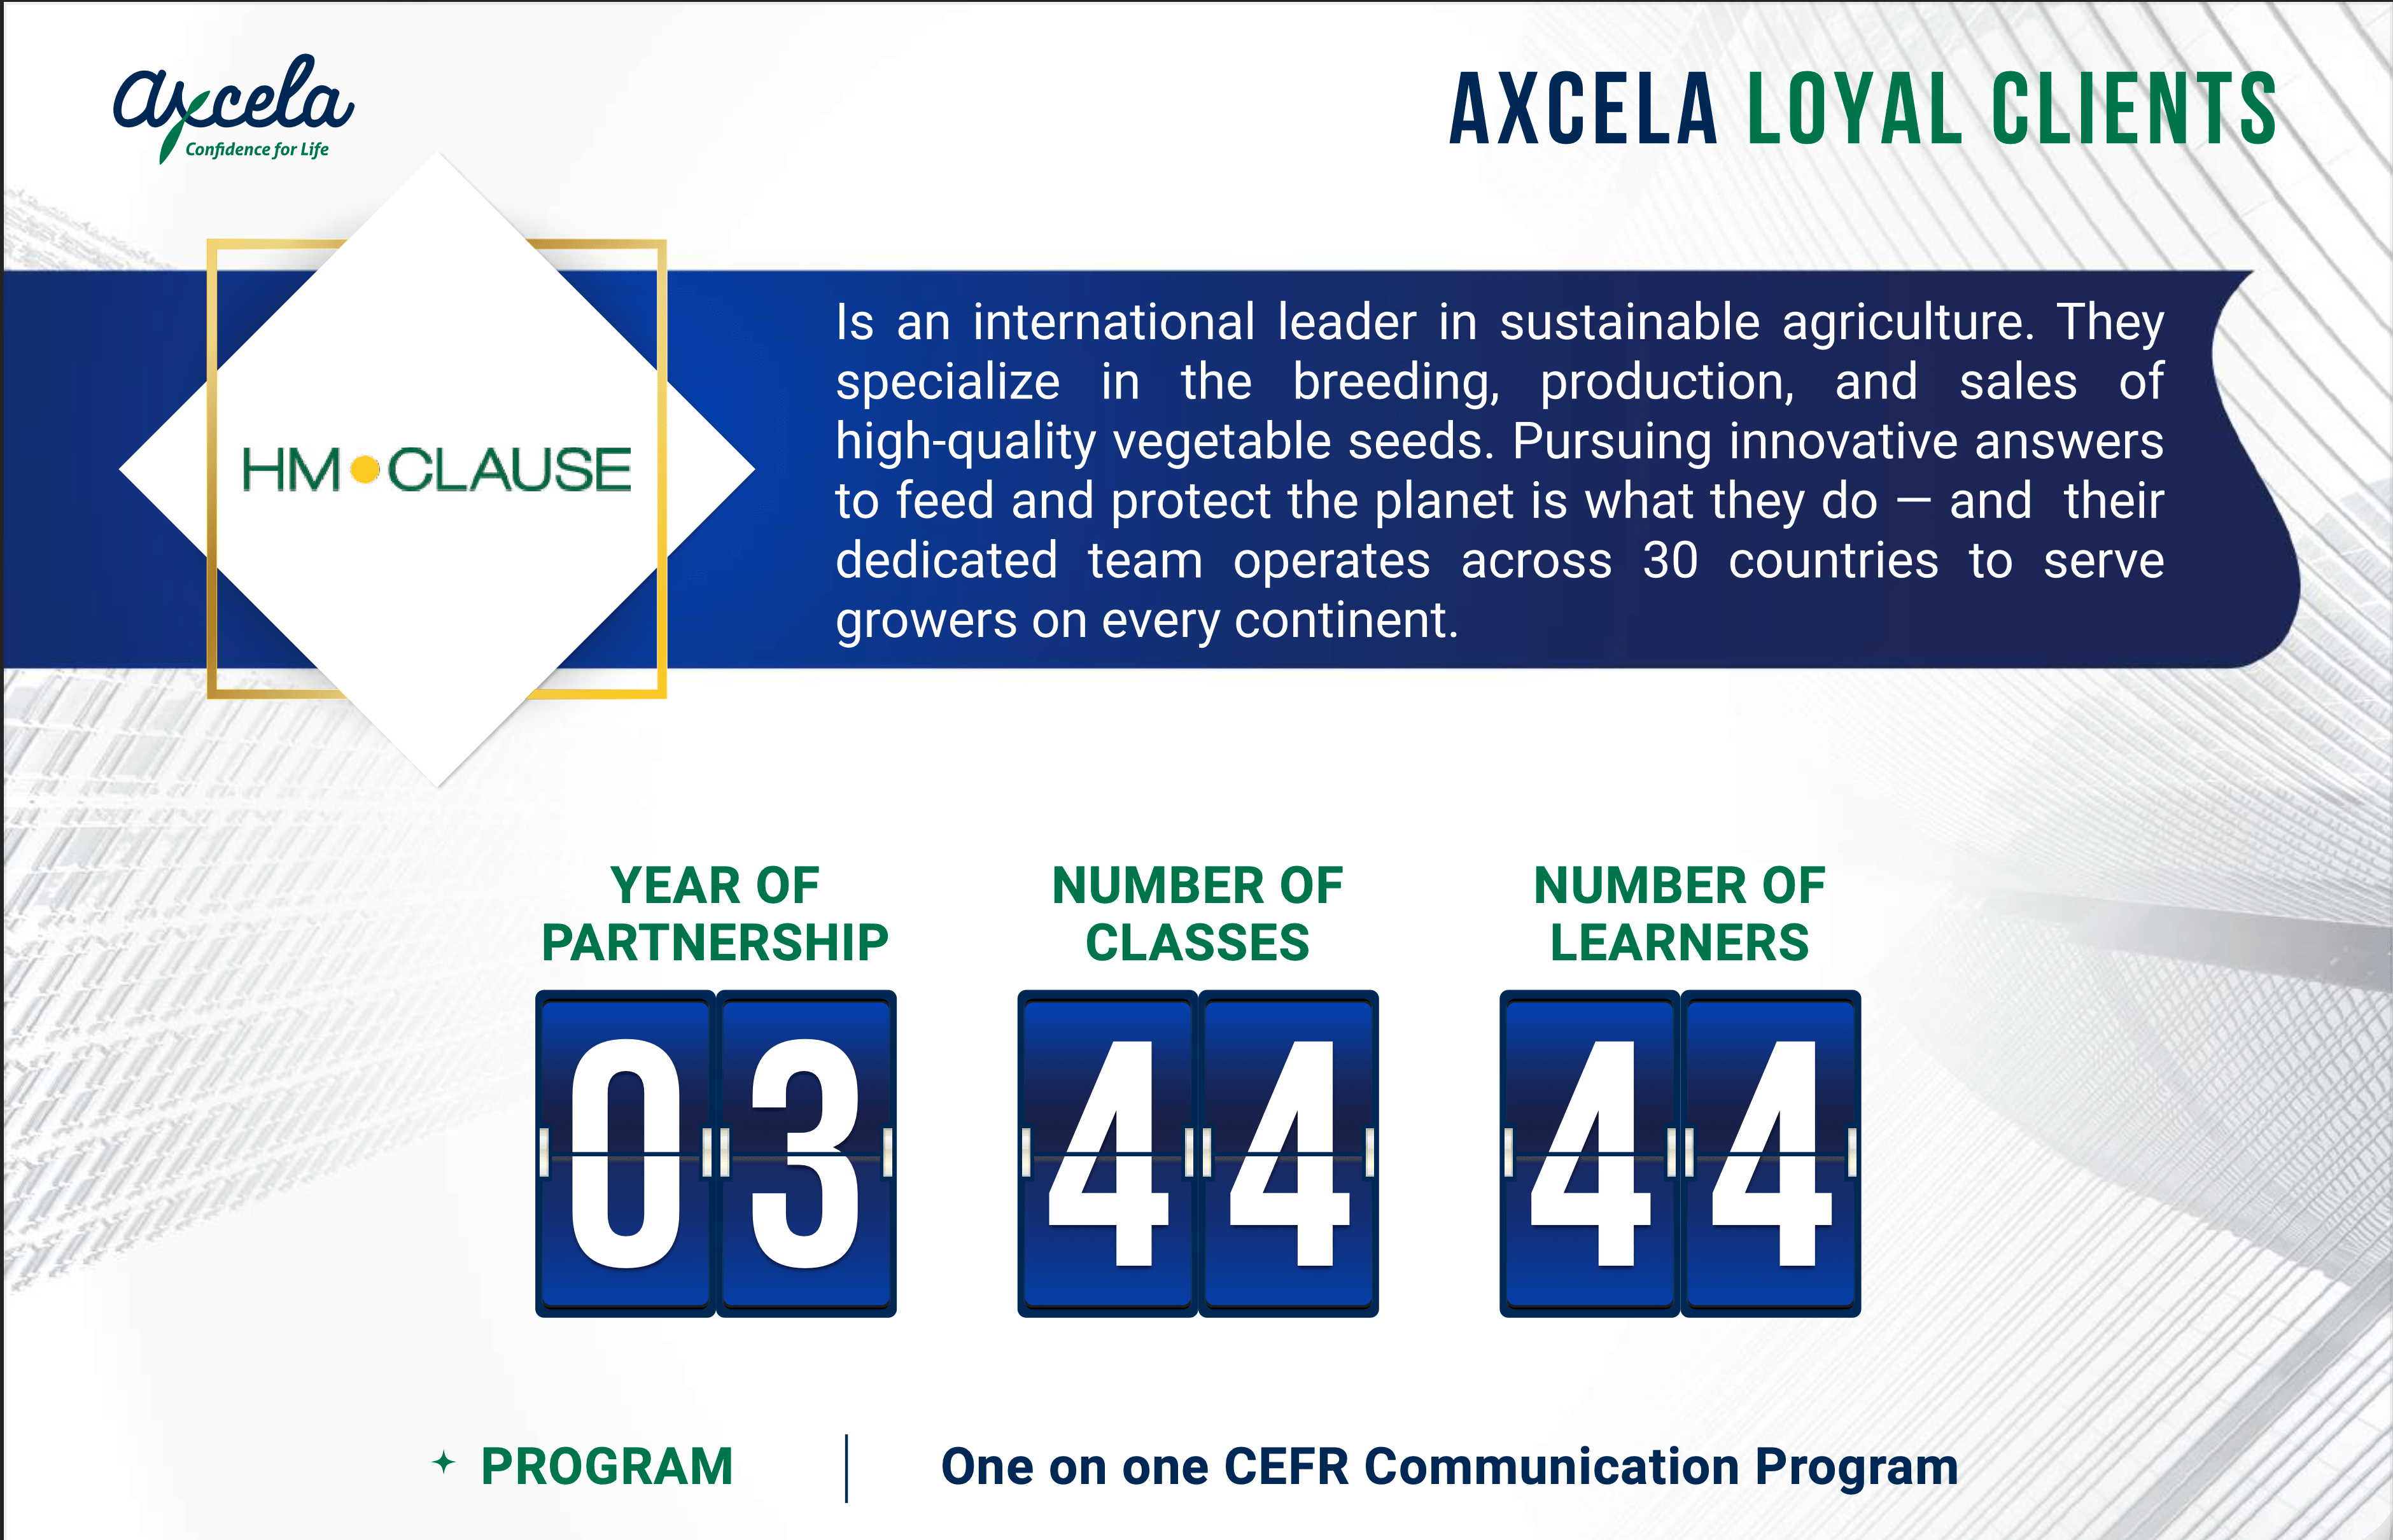 Continuous partner of Axcela for 03 years